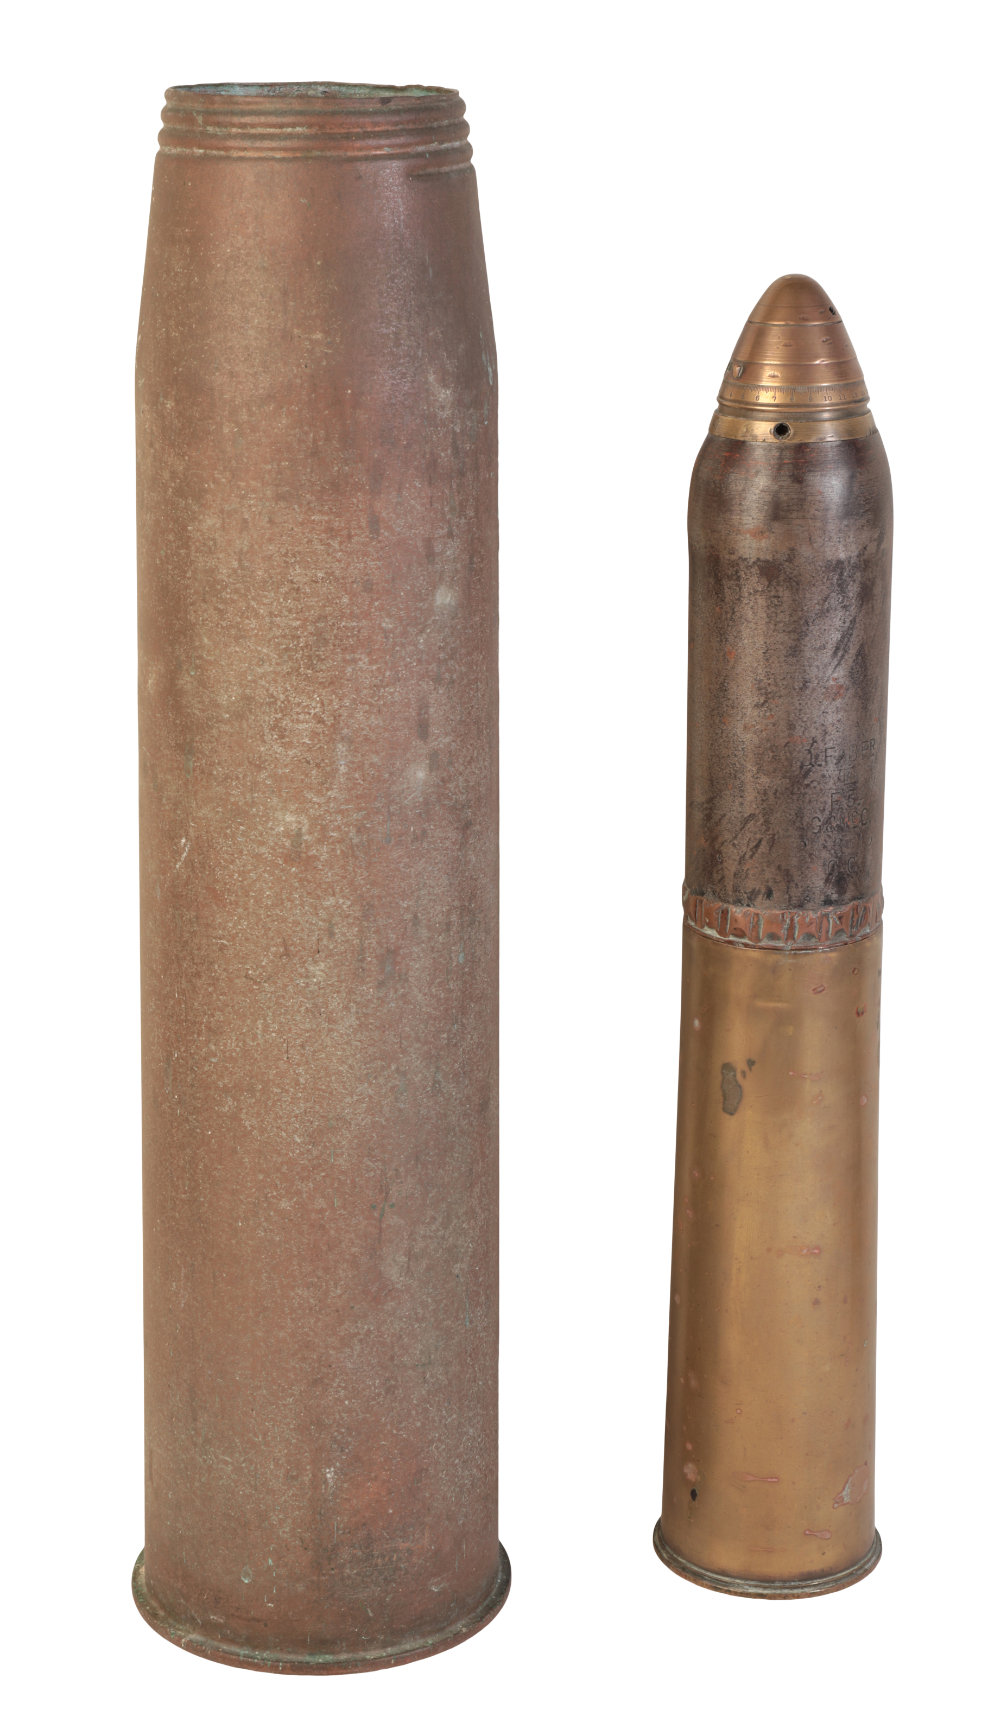 A 1962 BRASS MILITARY SHELL stamped